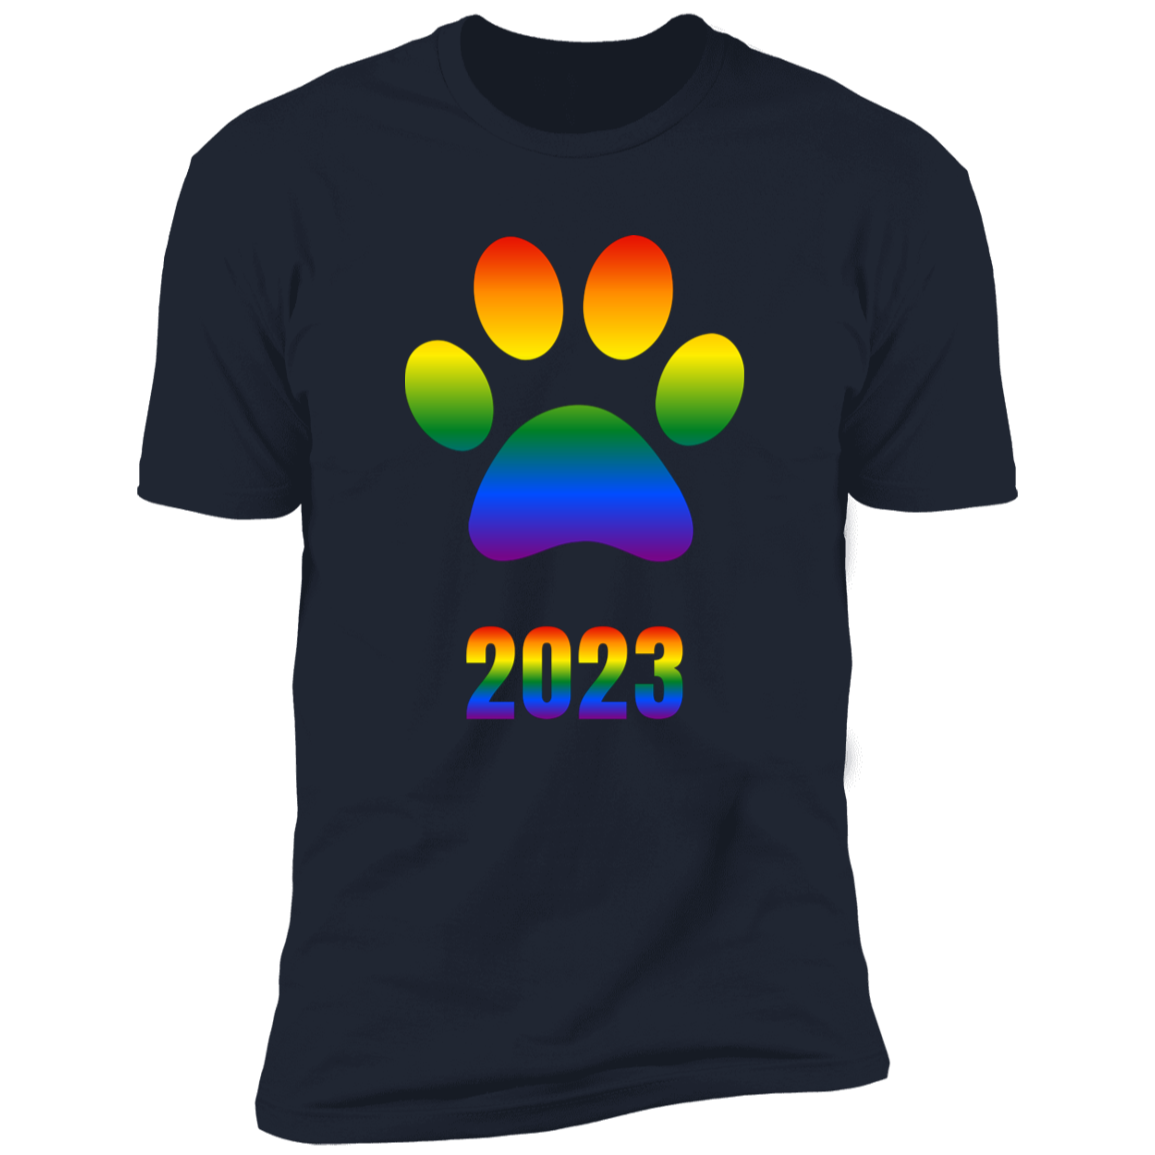 Dog Paw pride 2023 t-shirt, dog pride dog shirt for humans, in navy blue